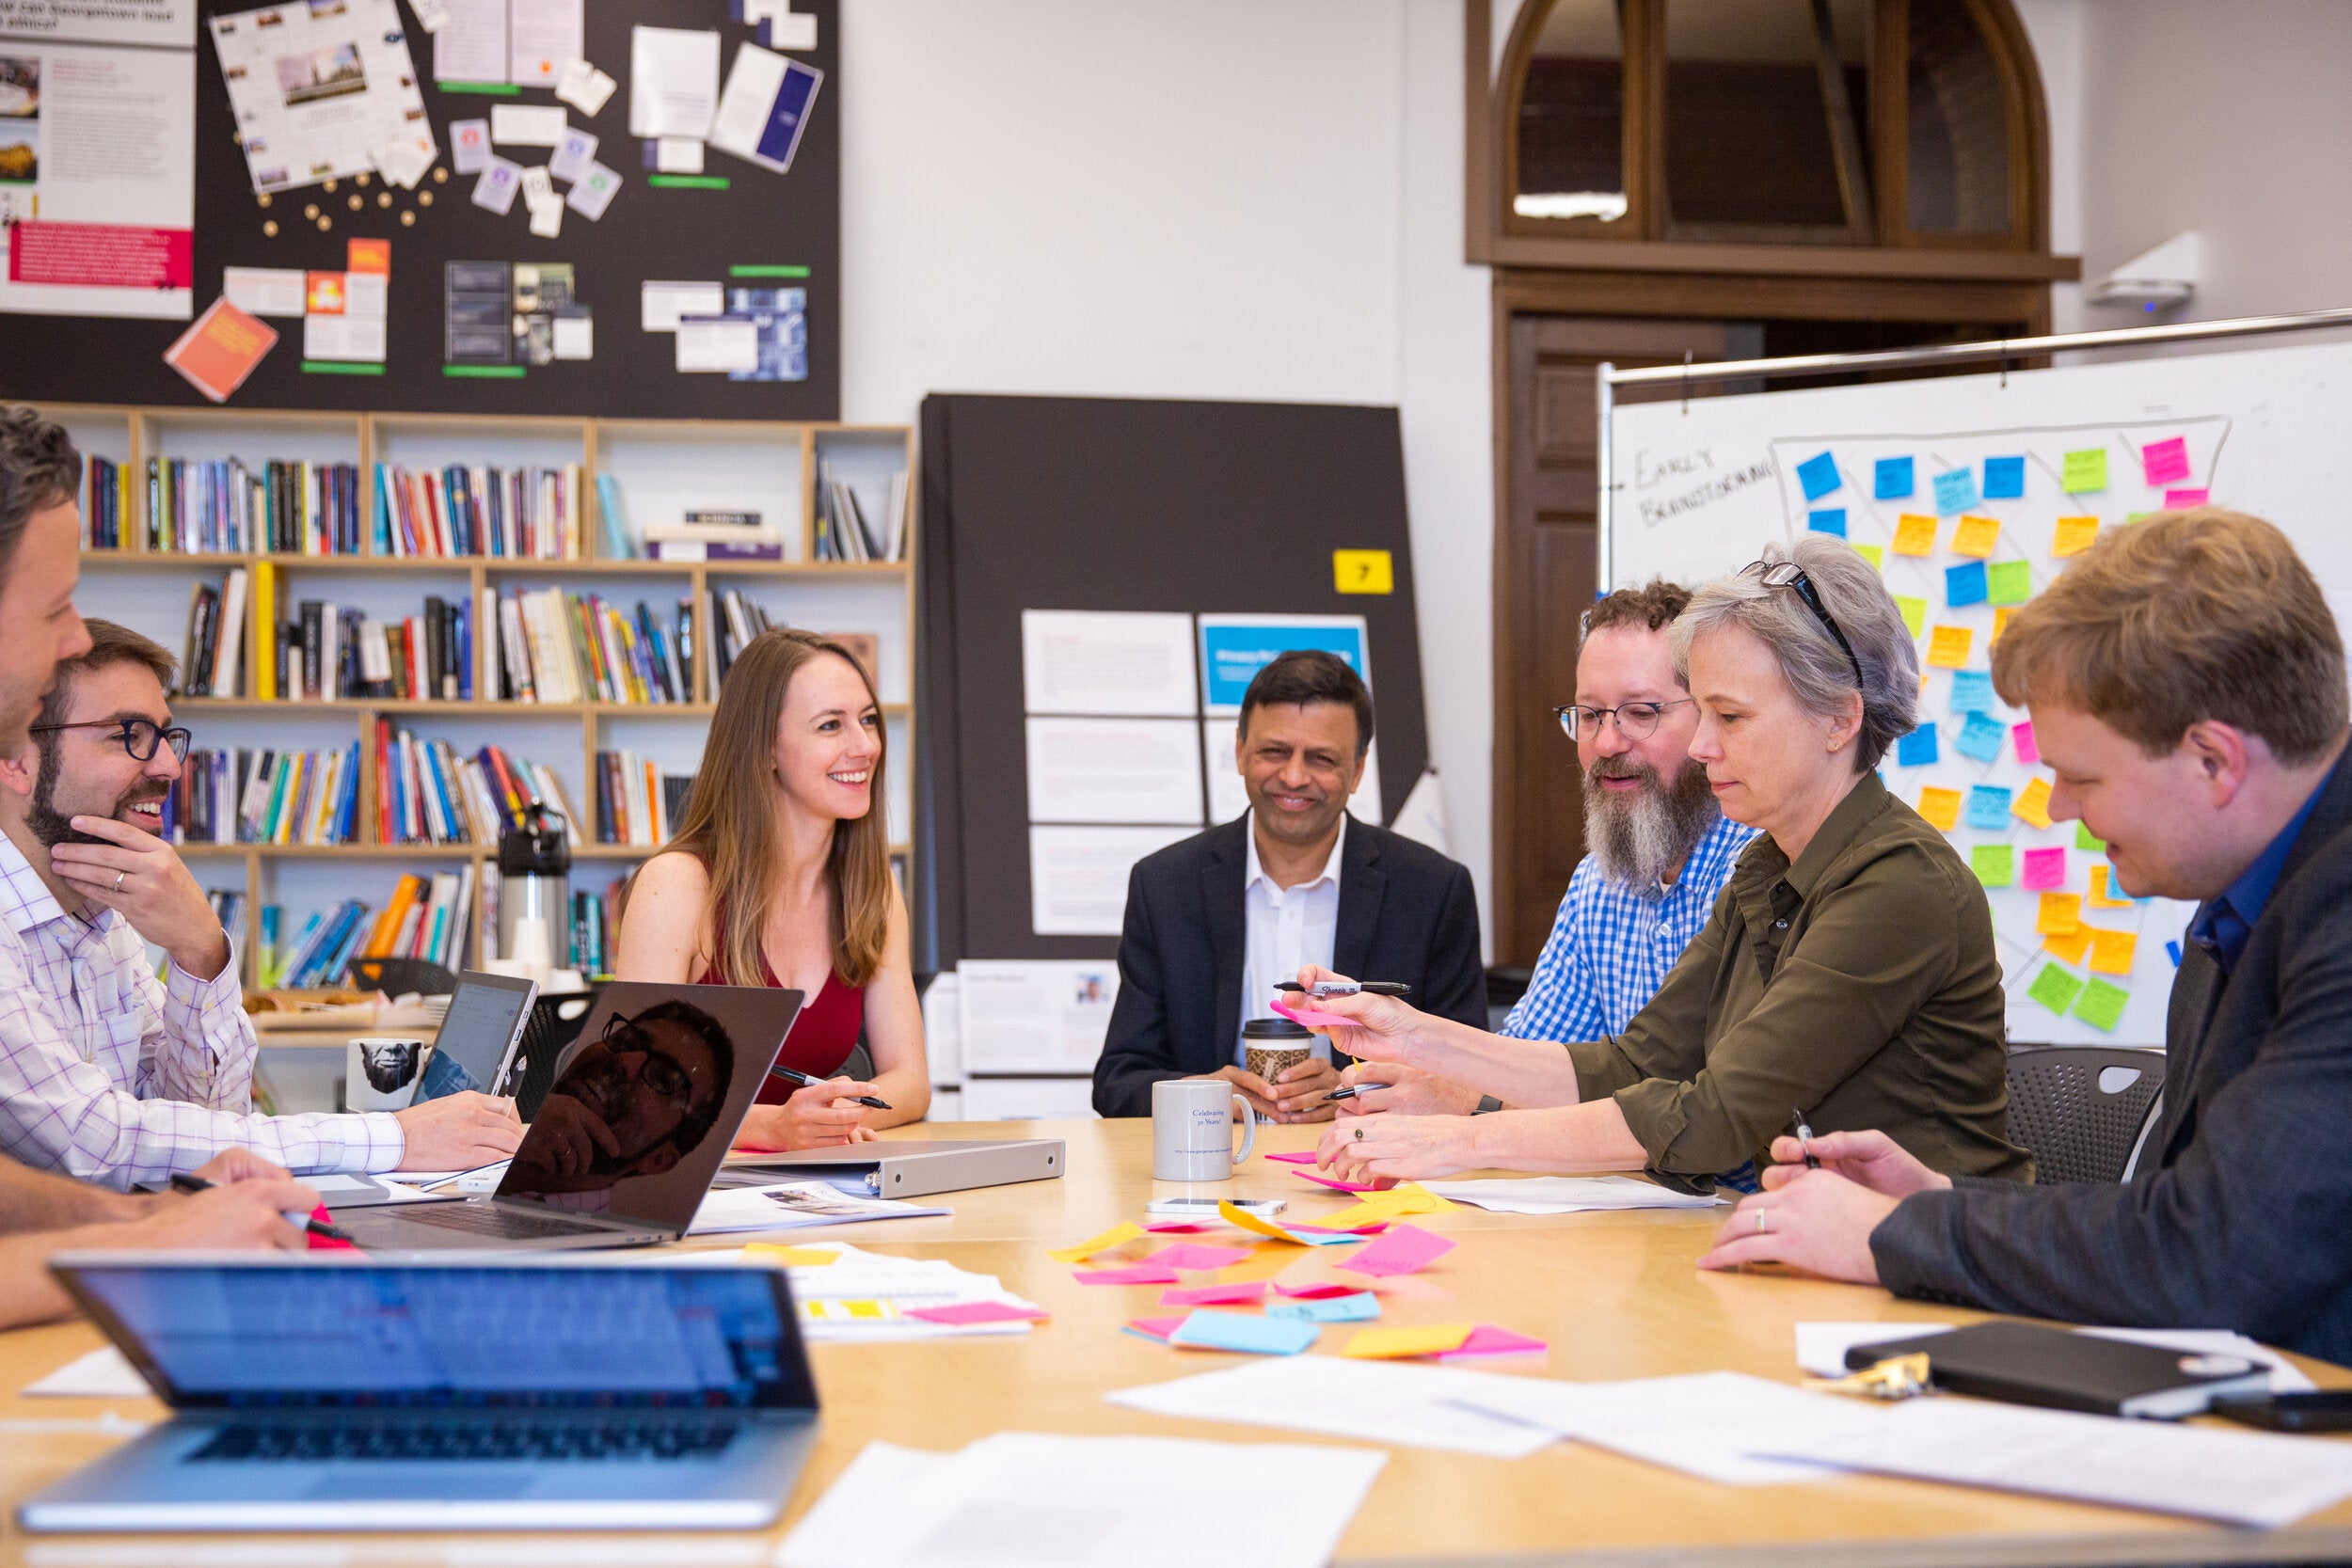 Memebers of the Ethics Lab and Georgetown's Department of Computer Science engage in ideation process to find innovative solutions to complex issues at the intersection of technology, ethics, and governance.